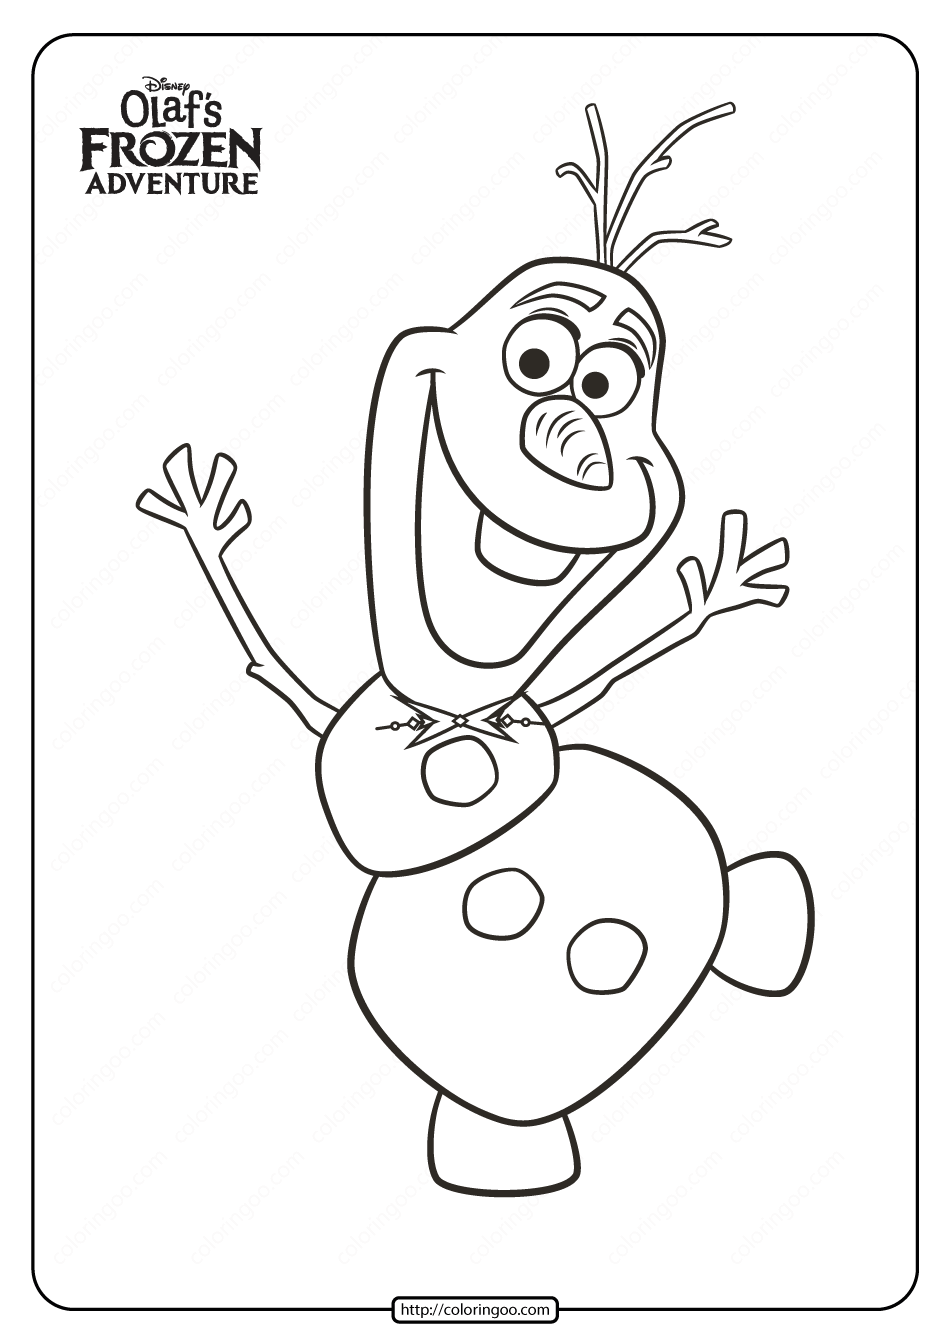 disney olafs frozen adventure coloring pages 03